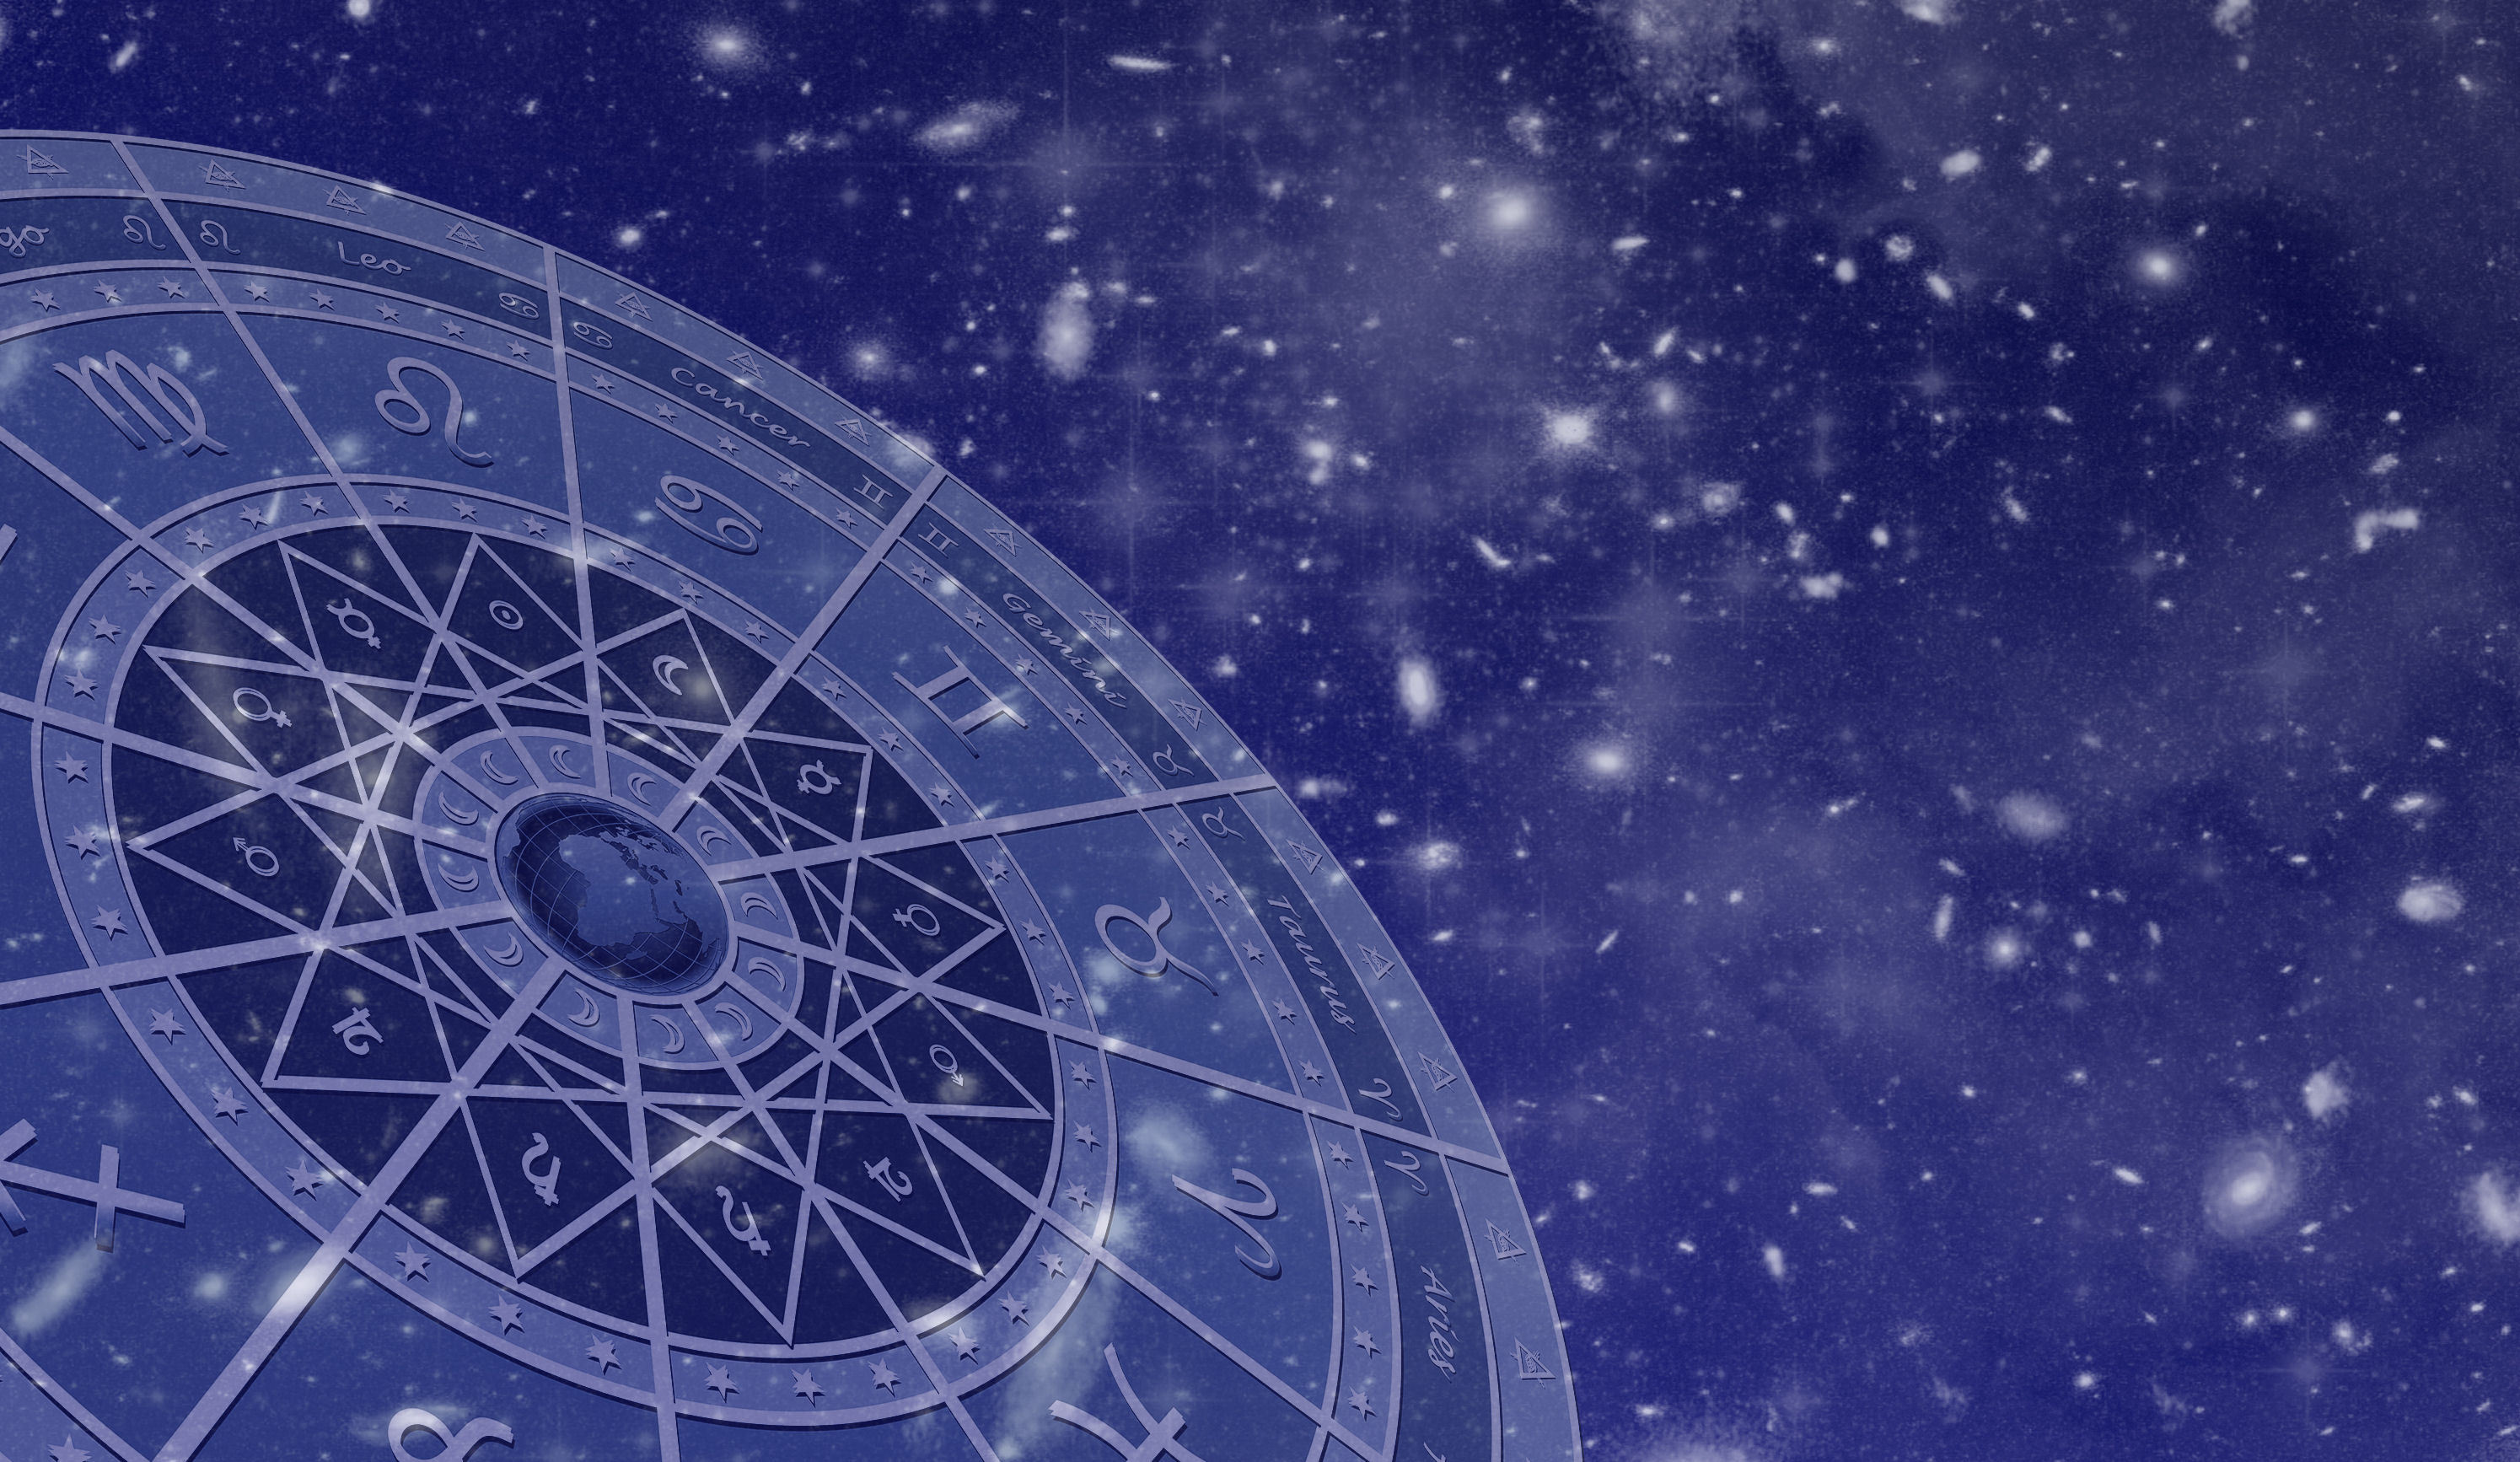 Signs Of The Zodiac On A Blue Background Wallpaper And Image